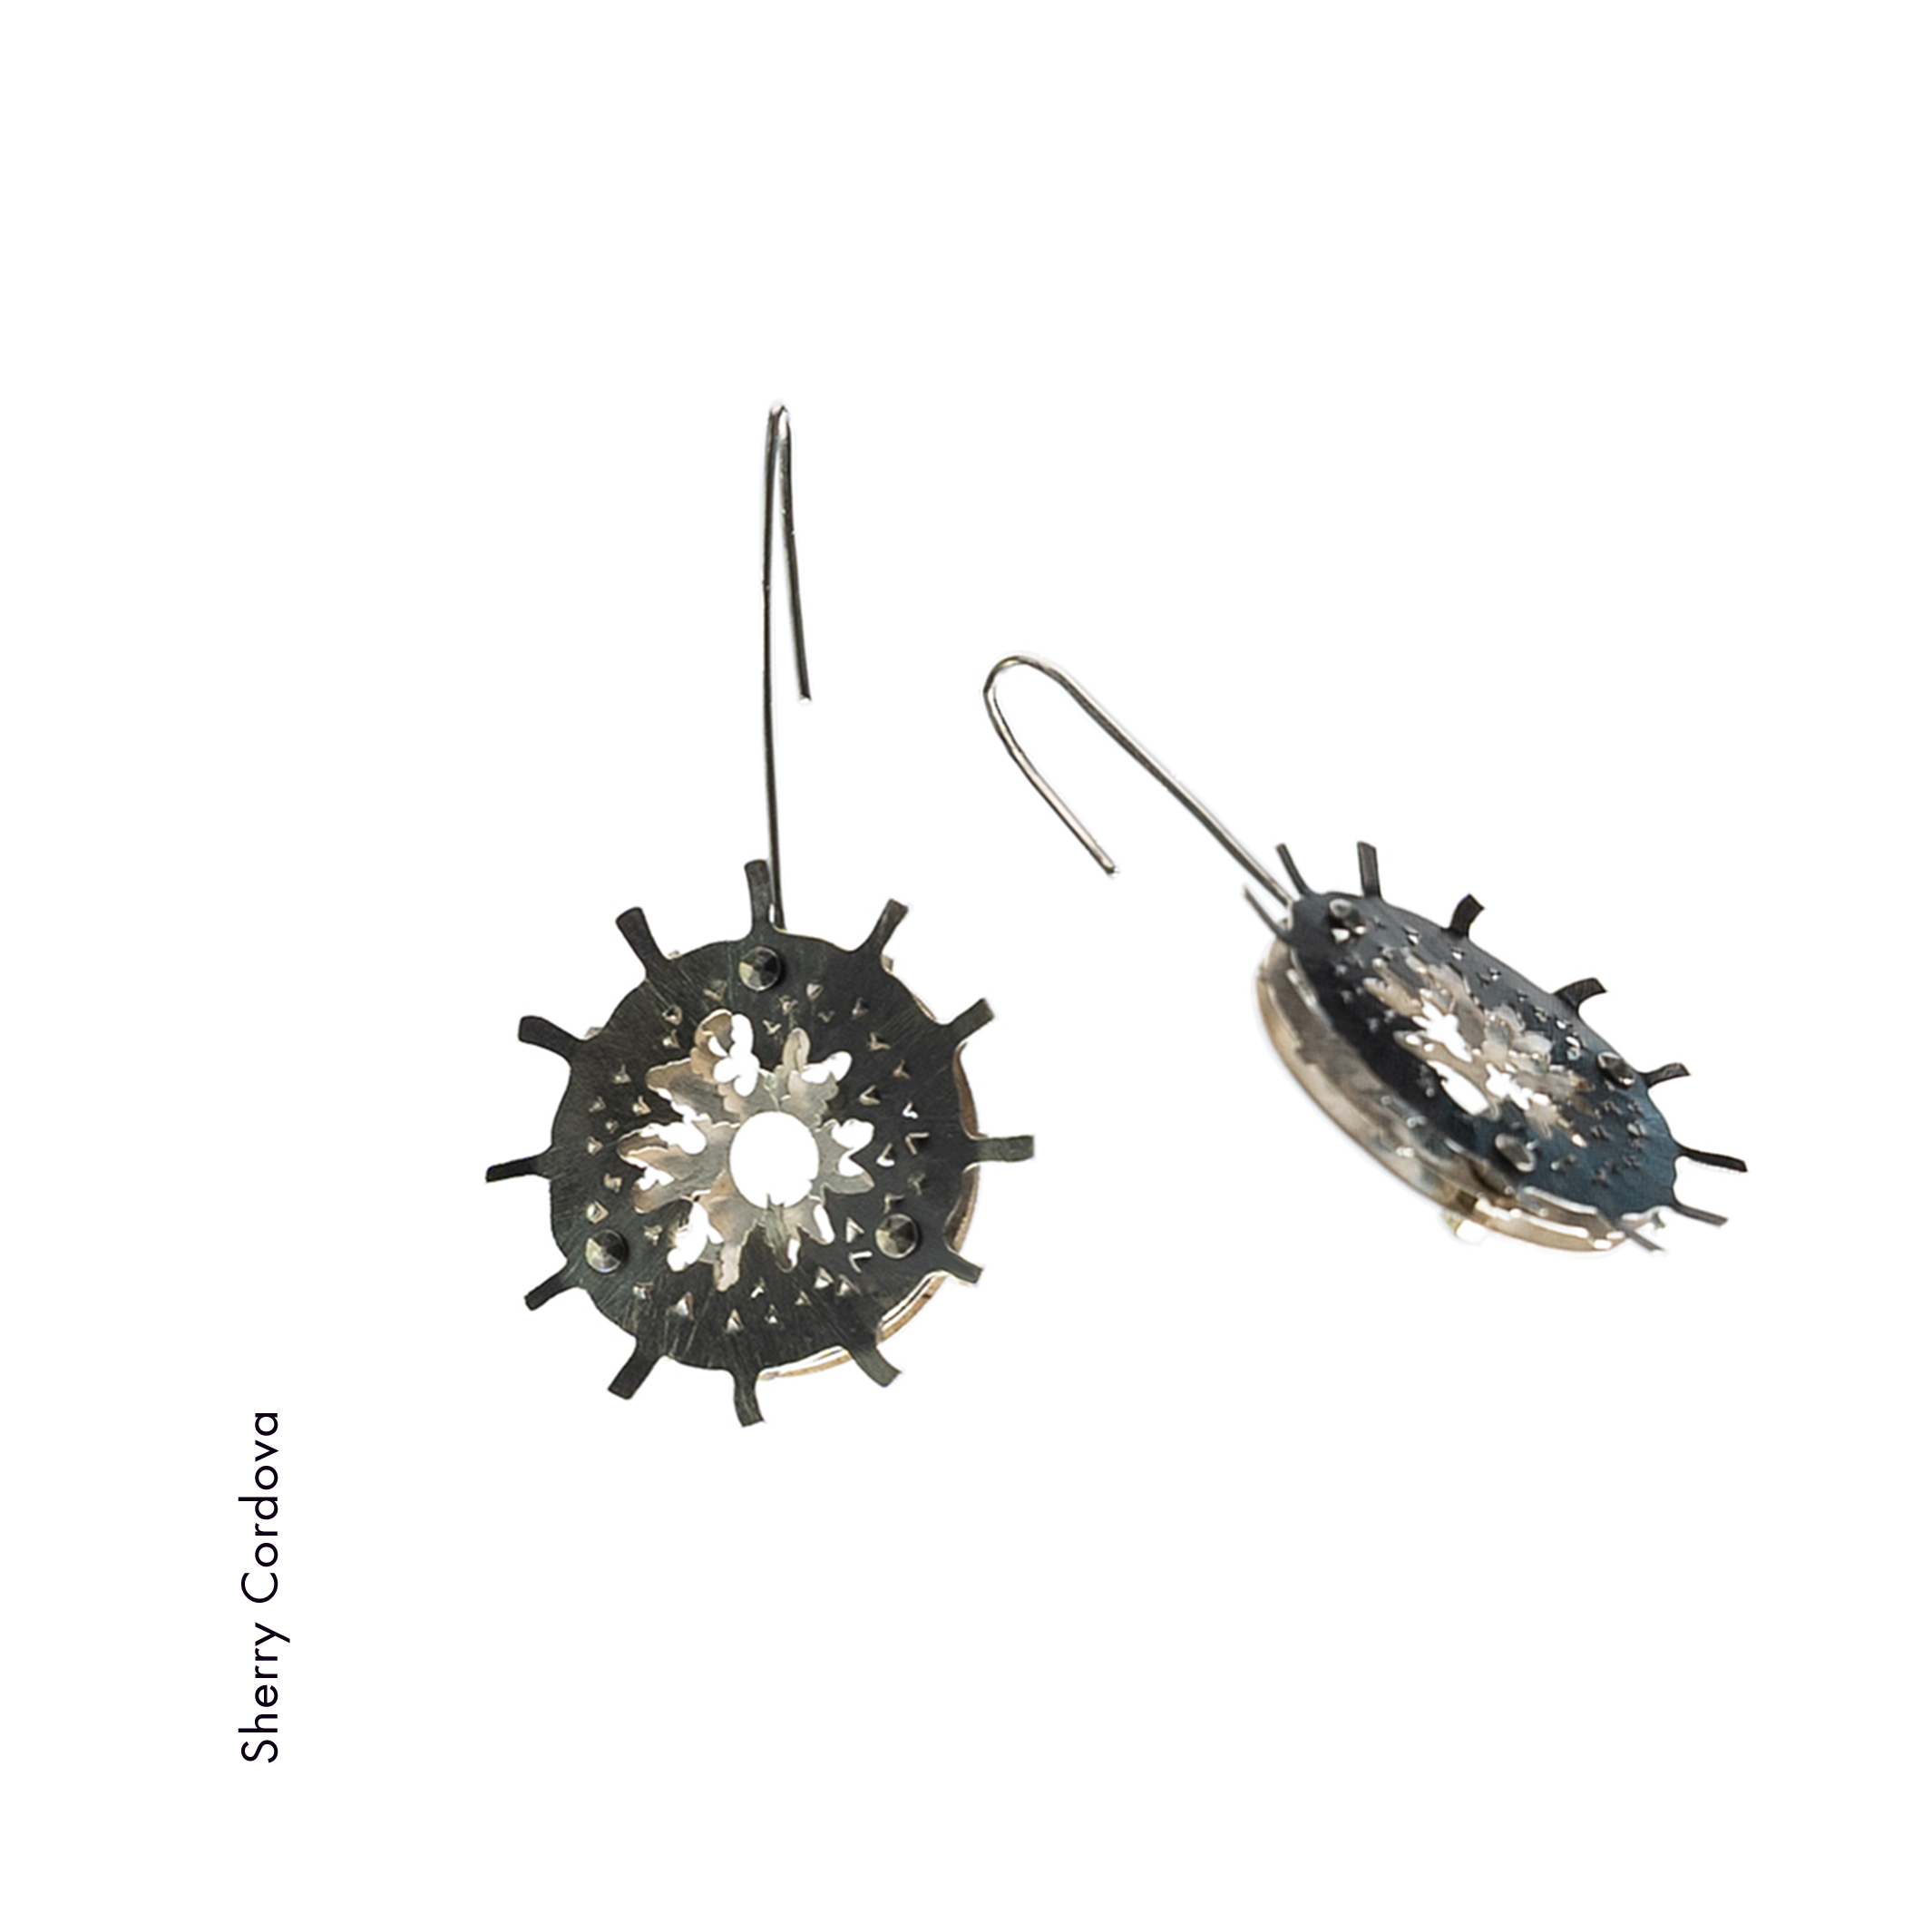 Sherry Cordova made these earrings using 3 layers of argentium sterling silver which form a radiolaria. The top layer is patinated dark to highlight the bottom two layers. The niobium ear wires and stainless steel fasteners add an industrial touch to the organic shapes